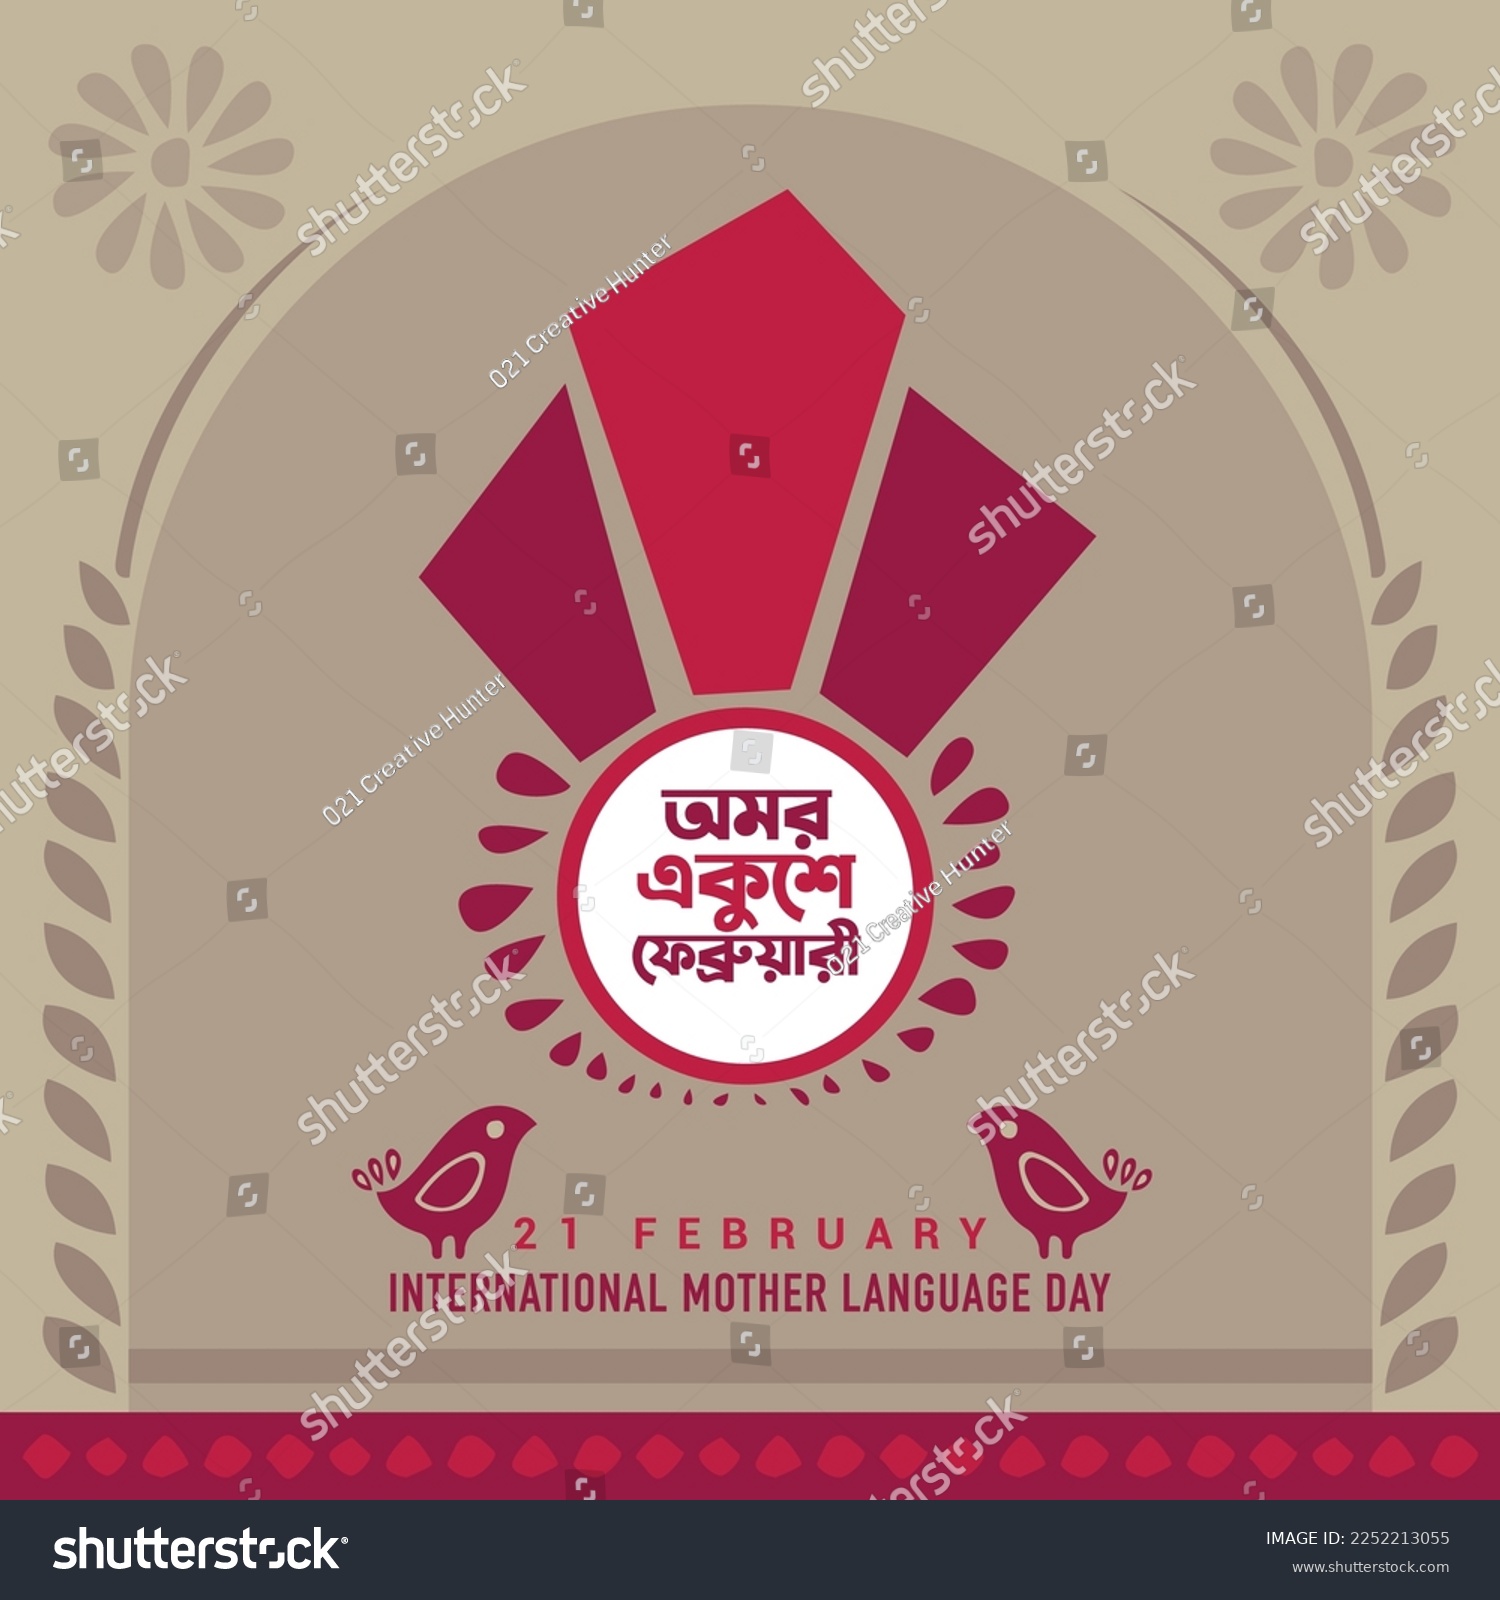 SVG of Illustration of Shaheed Minar, the Bengali words say 